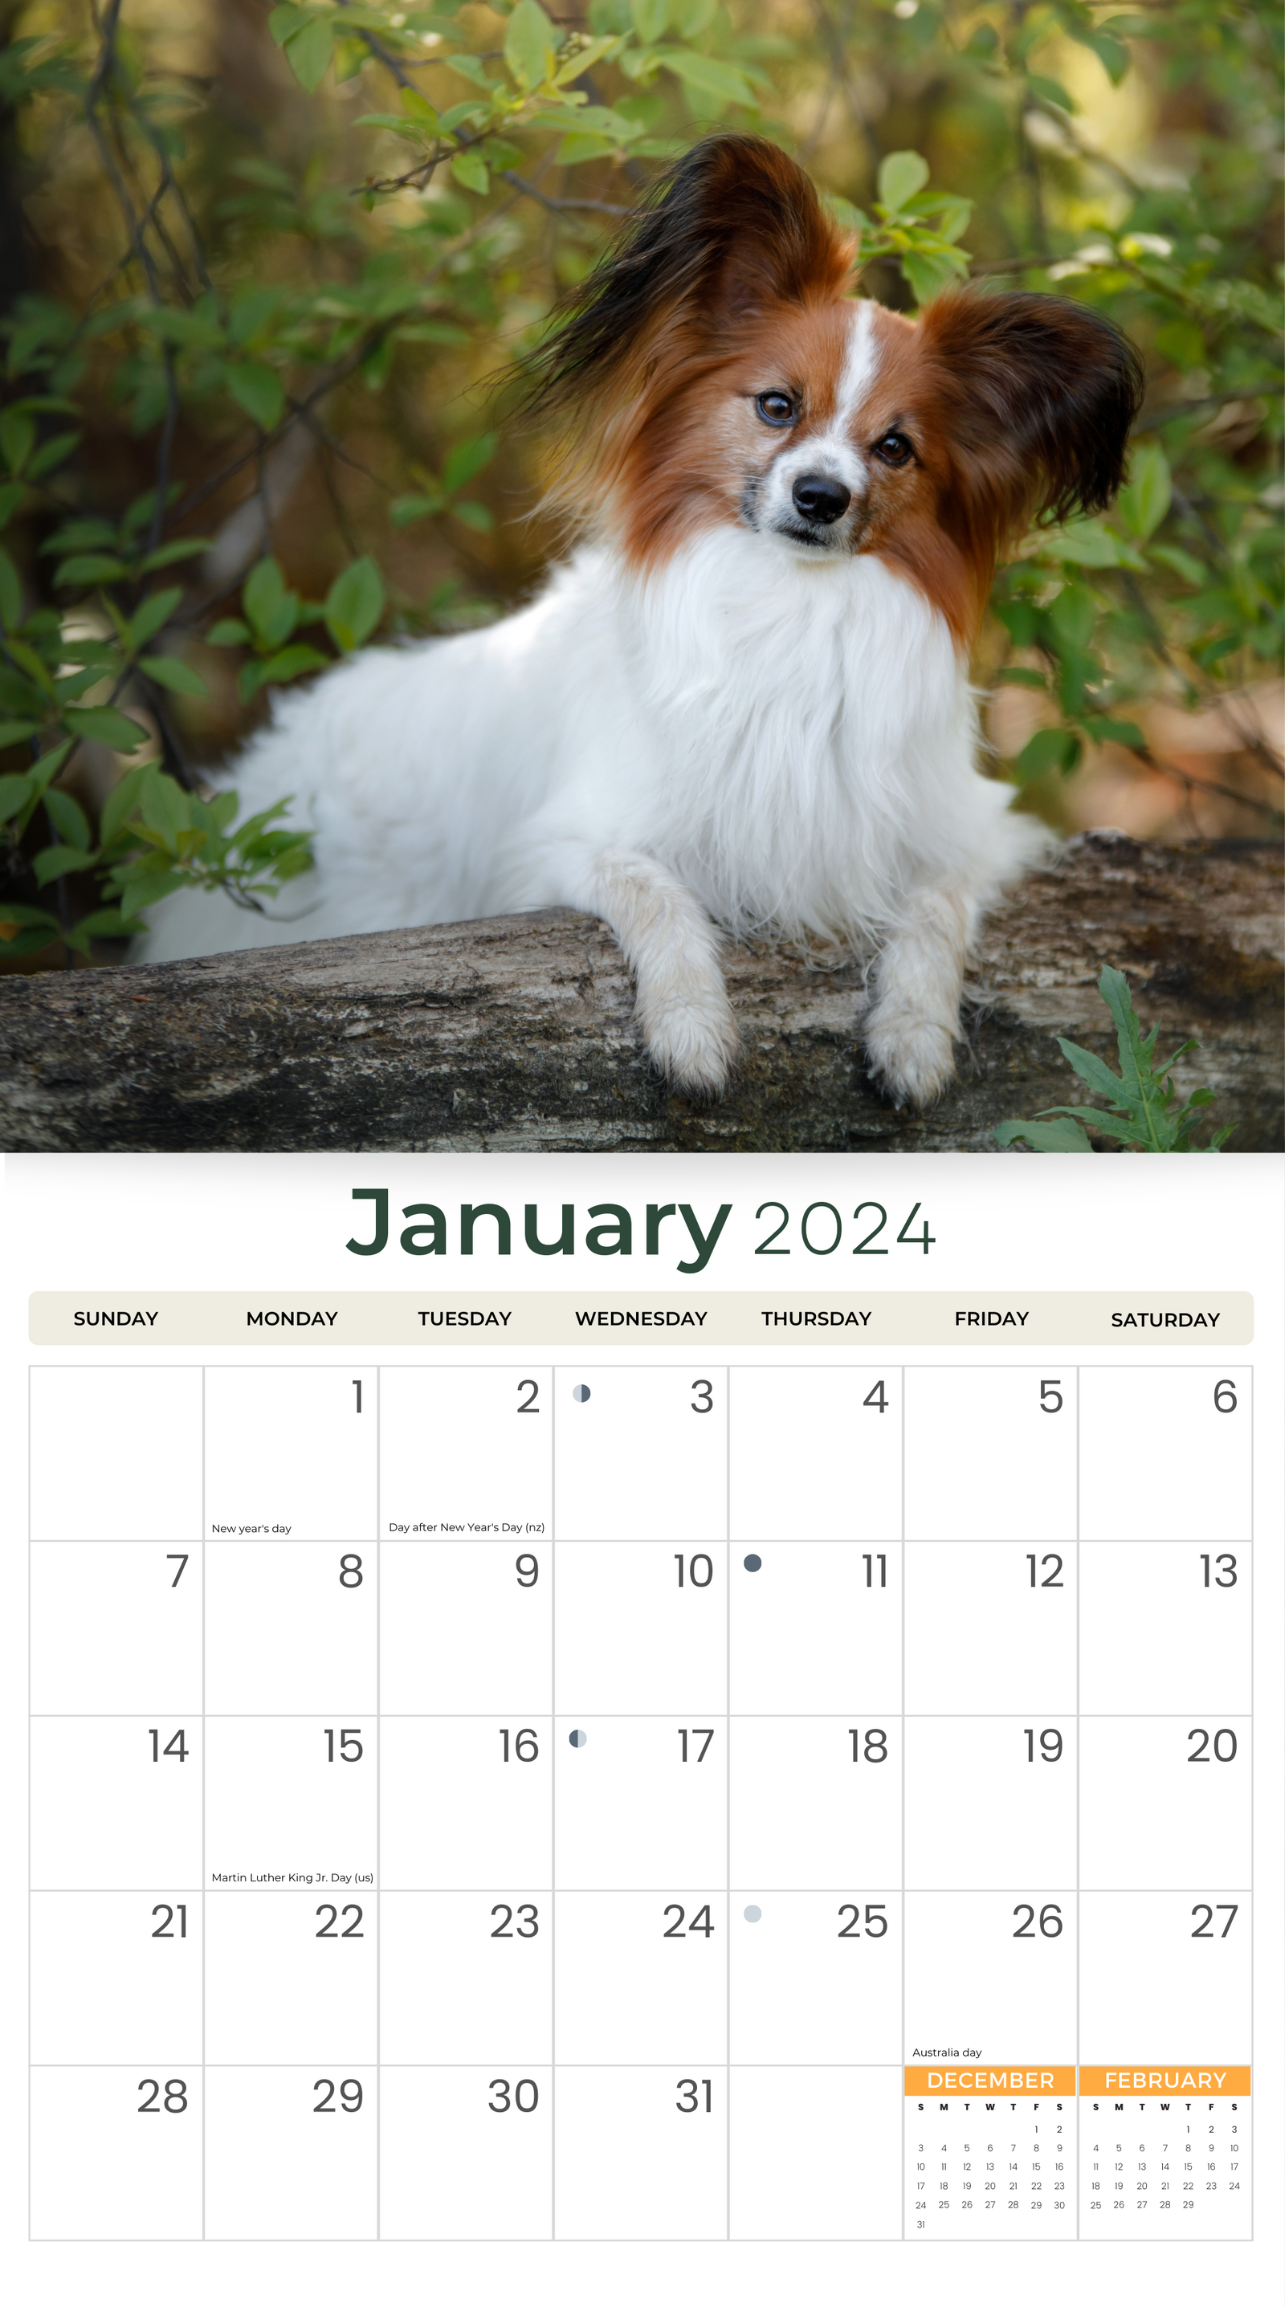 2024 Papillons Dogs & Puppies - Deluxe Wall Calendar by Just Calendars - 16 Month - Plastic Free